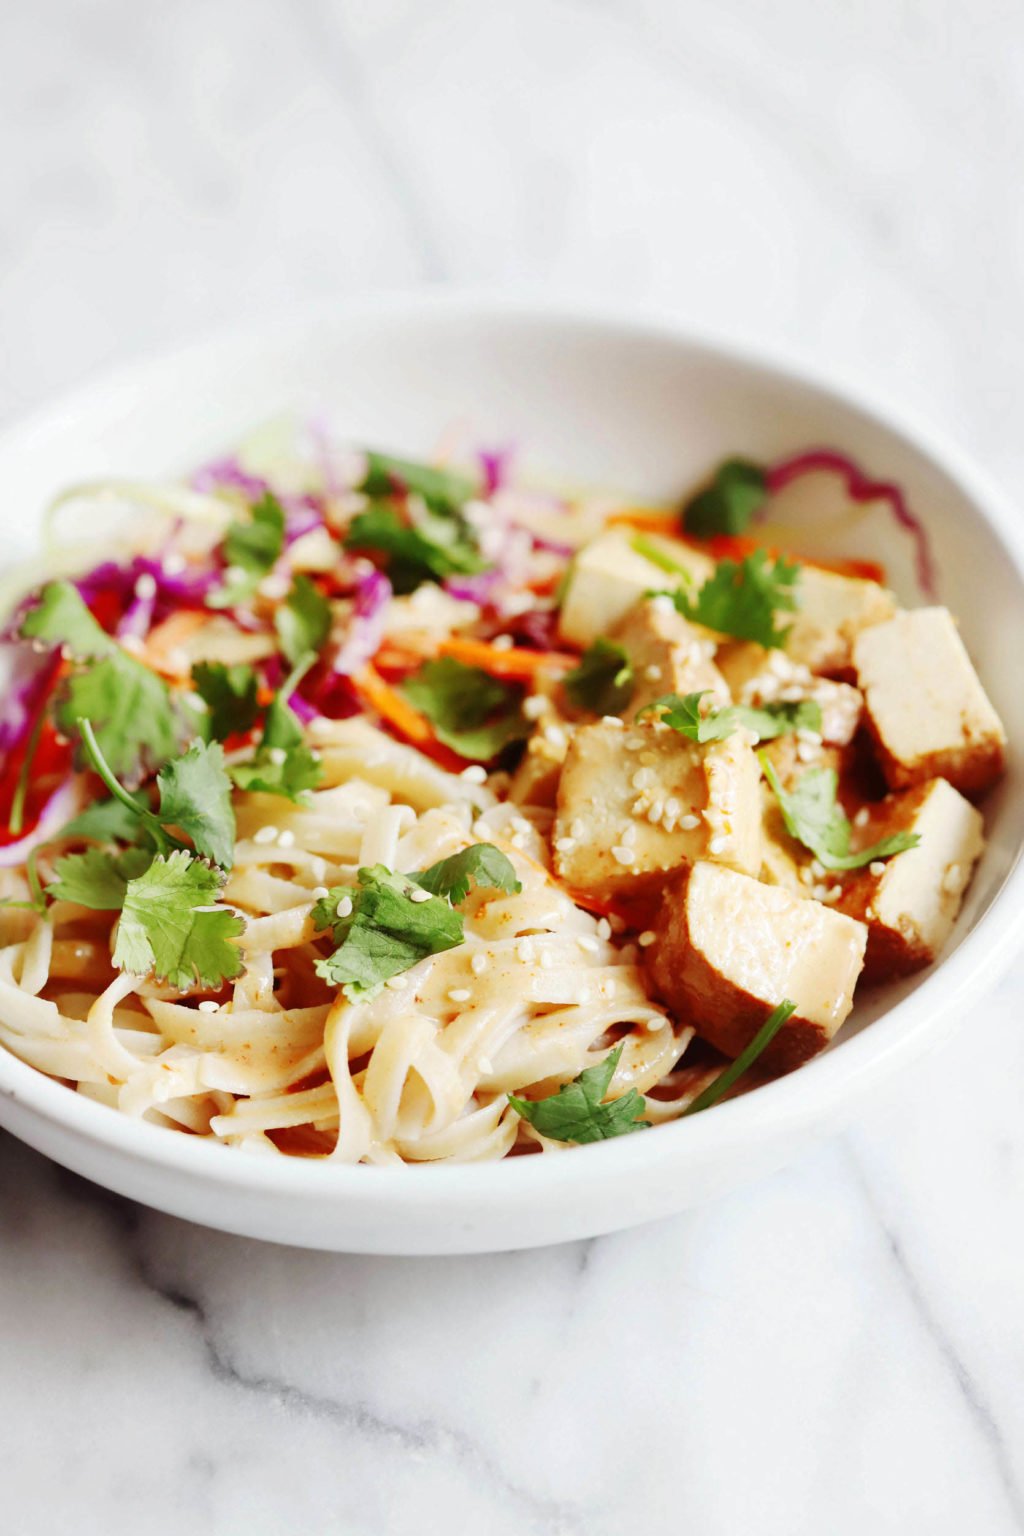 An angled photo of a tofu teriyaki bowl, which is topped with sesame seeds and fresh herbs.